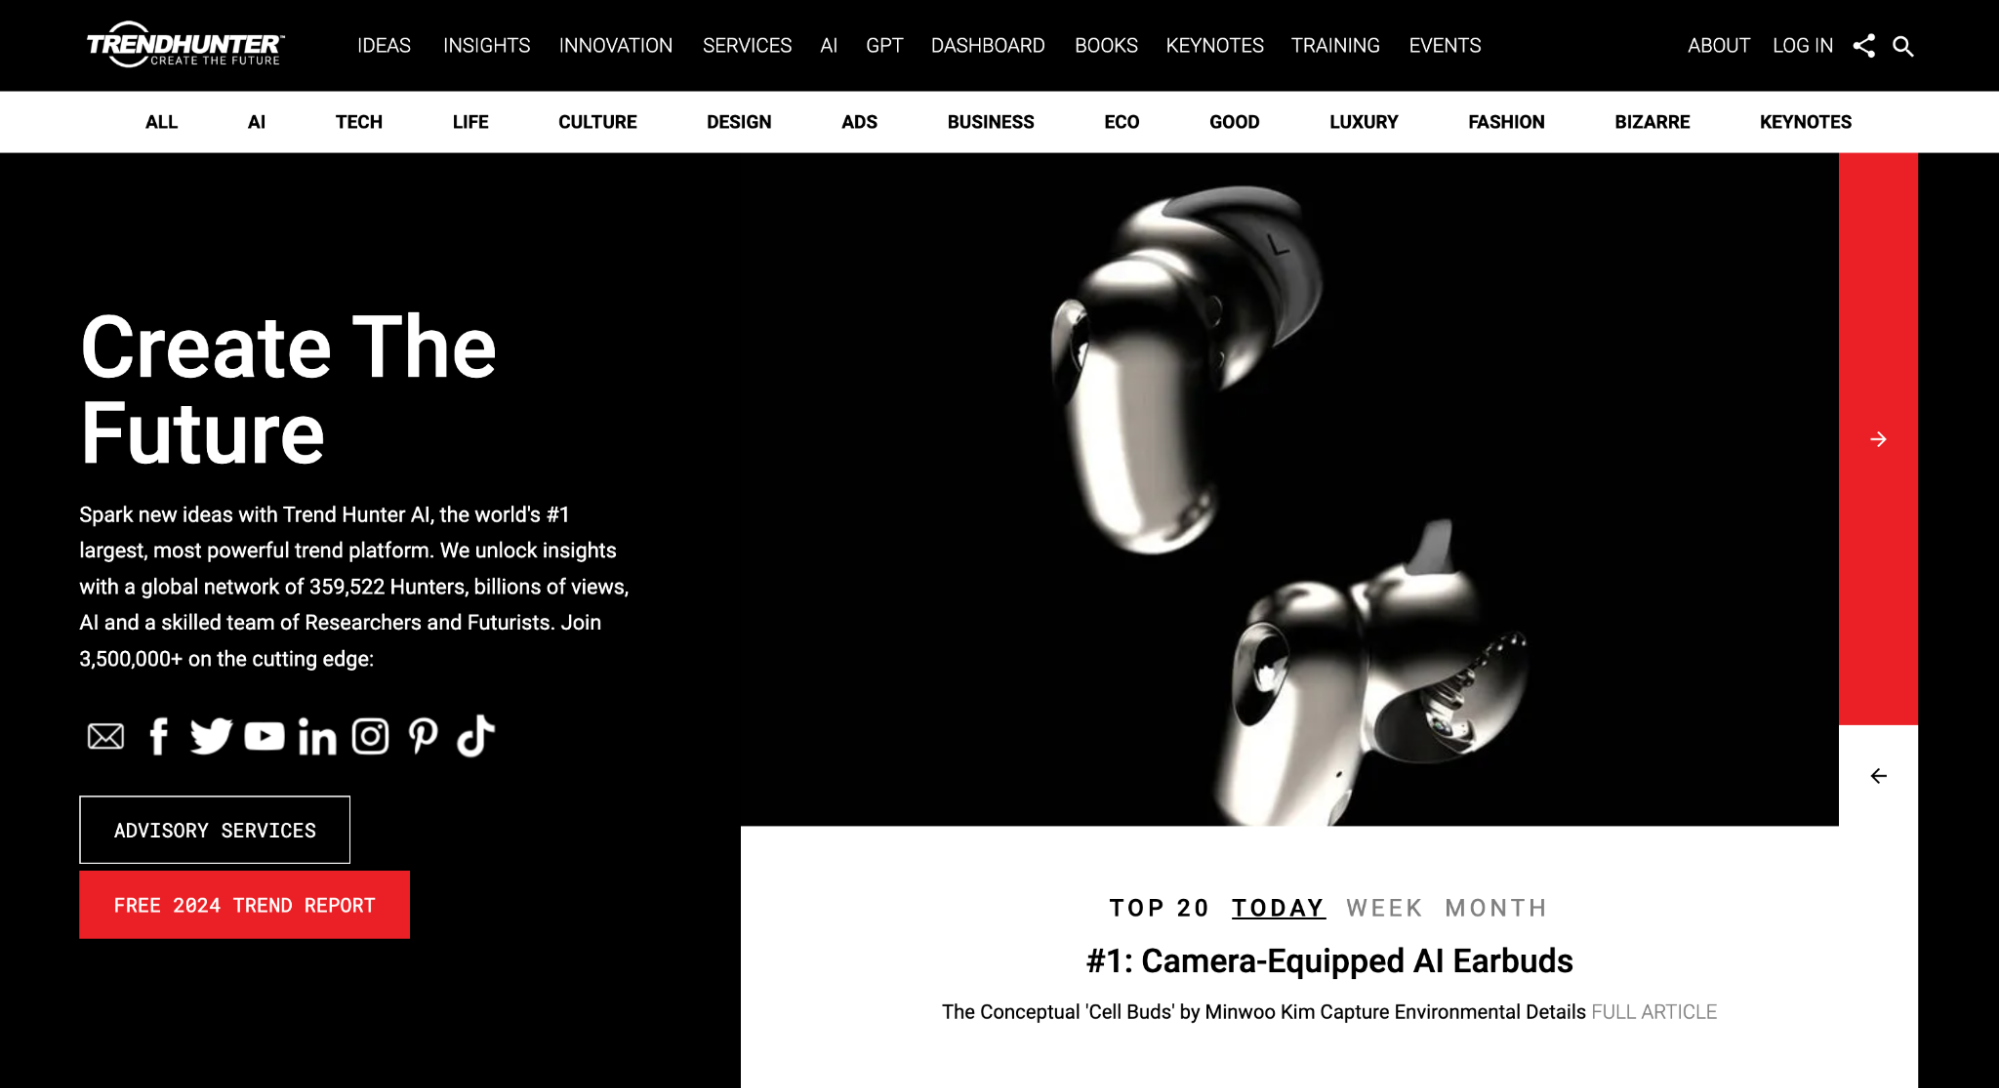 Trendhunter homepage promotes an article about AI earbuds, a recent trending product.